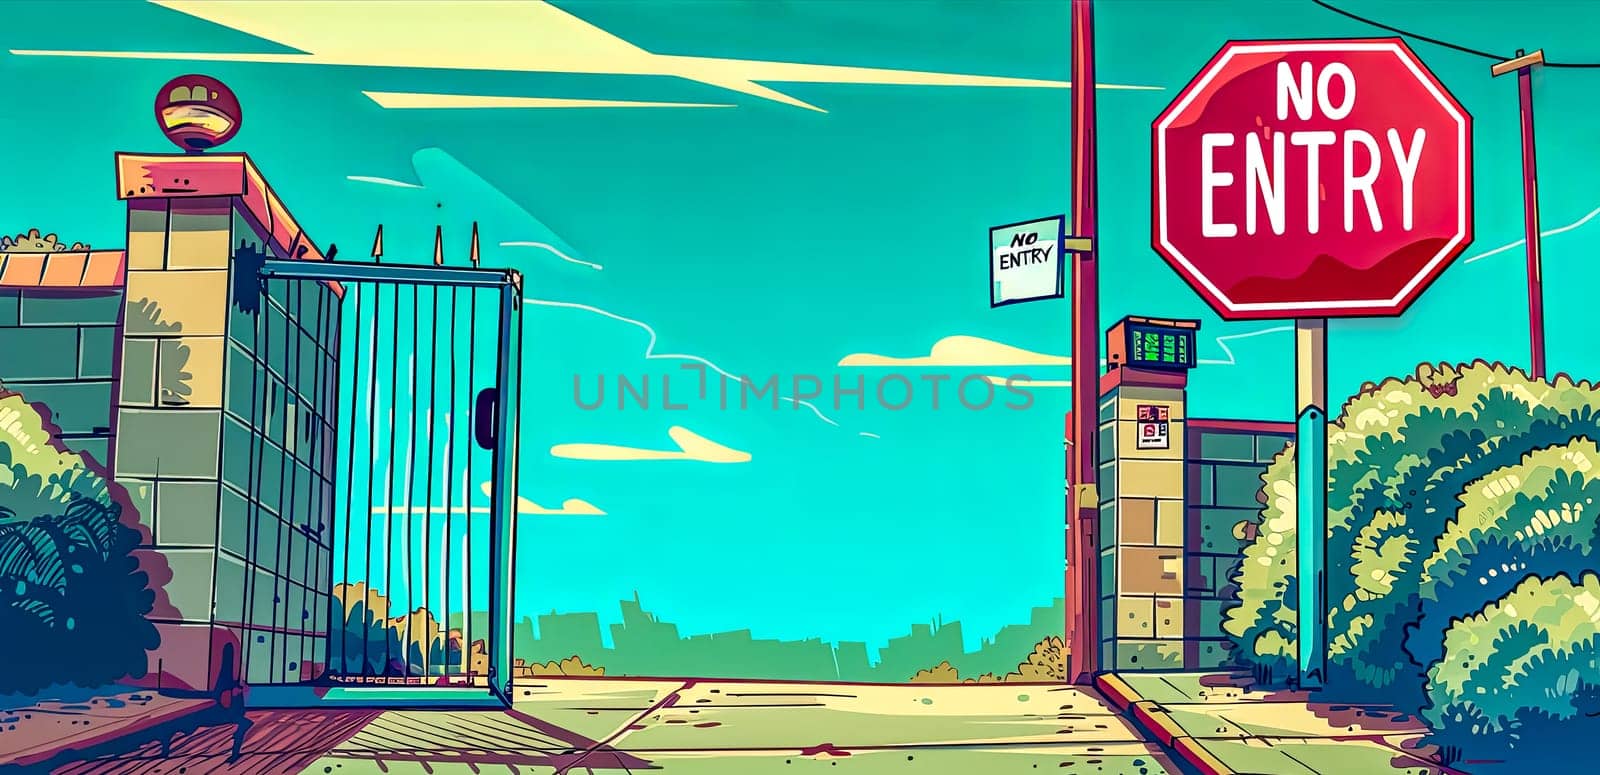 Retro-styled illustration of a no entry sign at a guarded gate by Edophoto